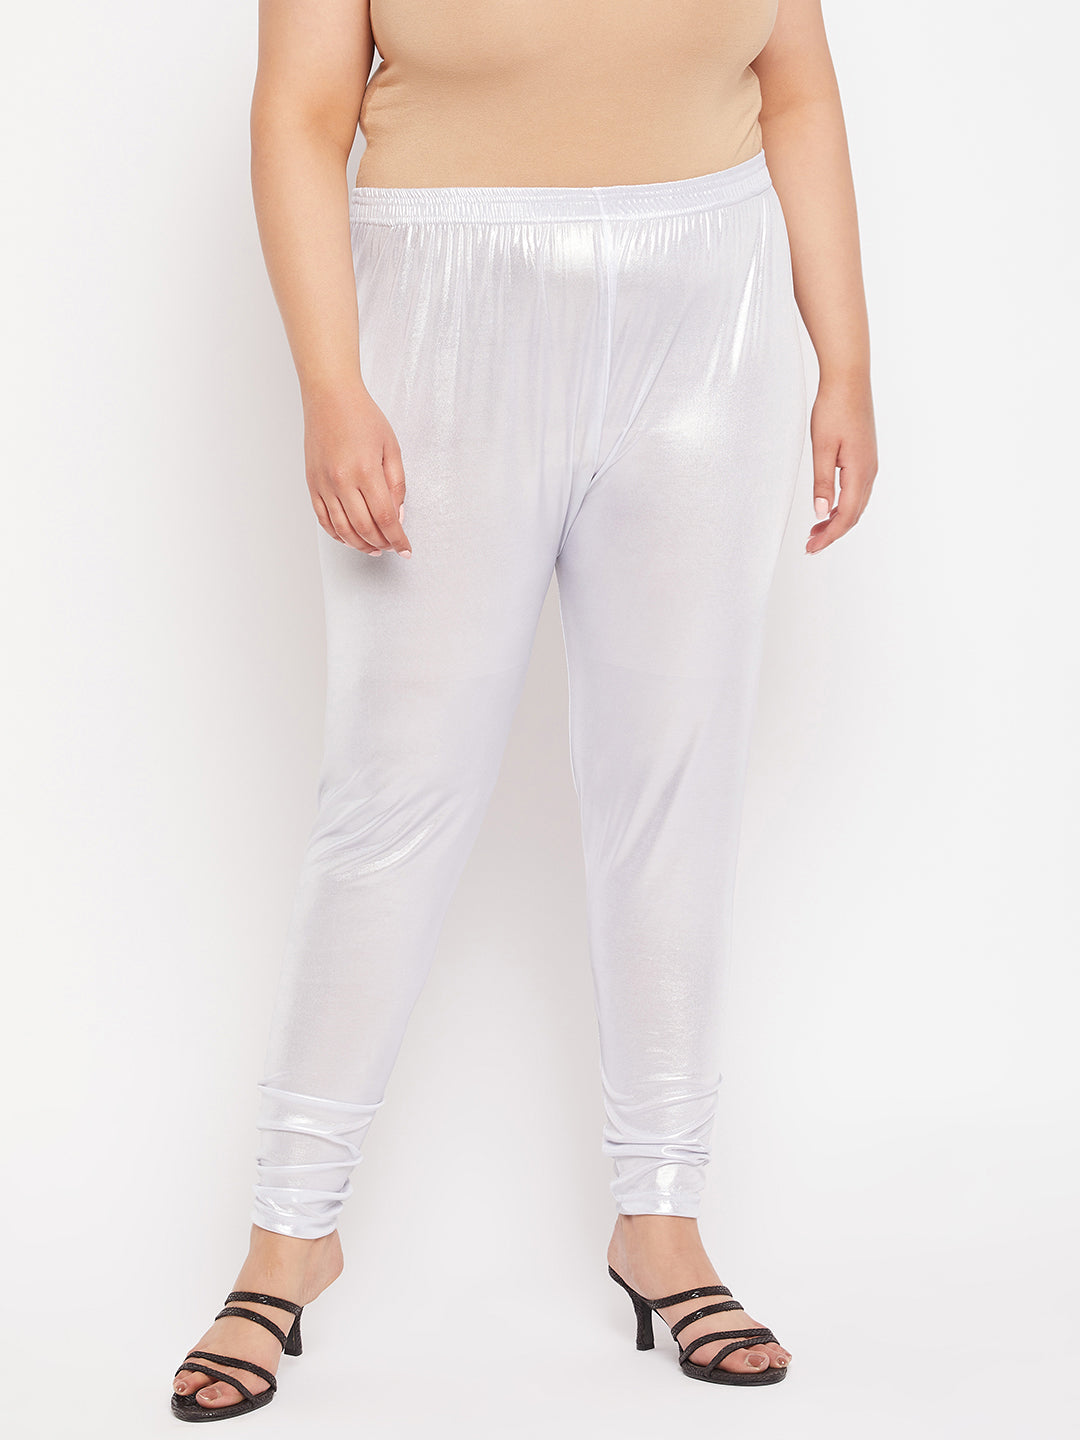 Buy Silver Solid Shimmer Leggings Online at Best Price - Clora Creation